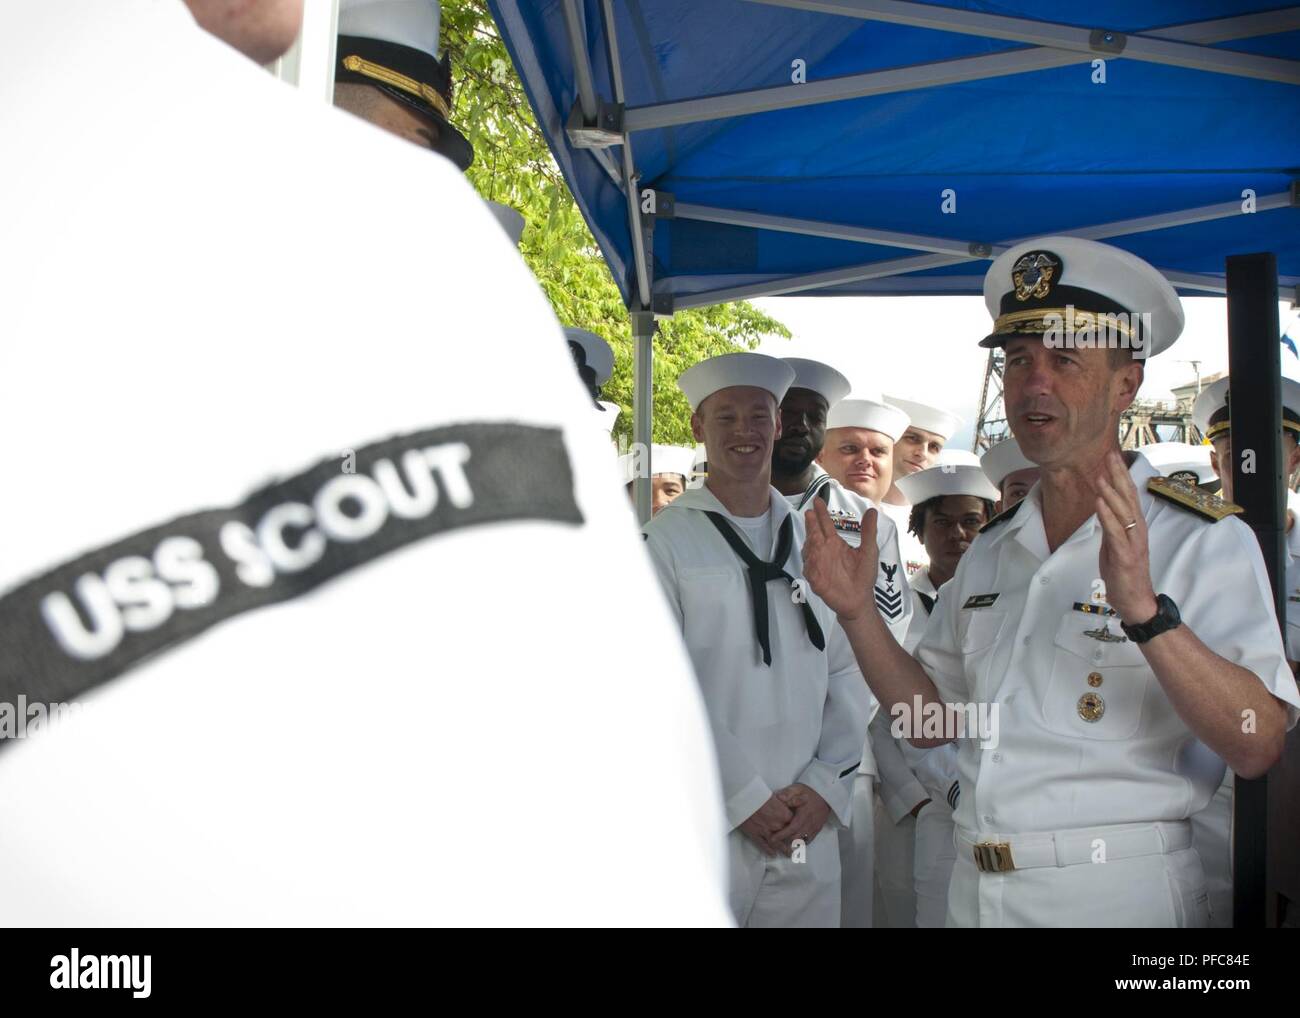 PORTLAND, Ore. (June 9, 2018) Chief of Naval Operations (CNO) Adm. John M. Richardson conducts an all-hands call alongside the Arleigh Burke-Class guided-missile destroyer, USS Michael Murphy (DDG 112).  USS Michael Murphy is currently in Portland, Ore. for the annual Rose Festival and Navy Fleet Week. The festival and Portland Fleet Week are a celebration of the sea services with Sailors, Marines, and Coast Guard Members from the U.S. and Canada making the city a port of call.  (U. S. Navy Stock Photo